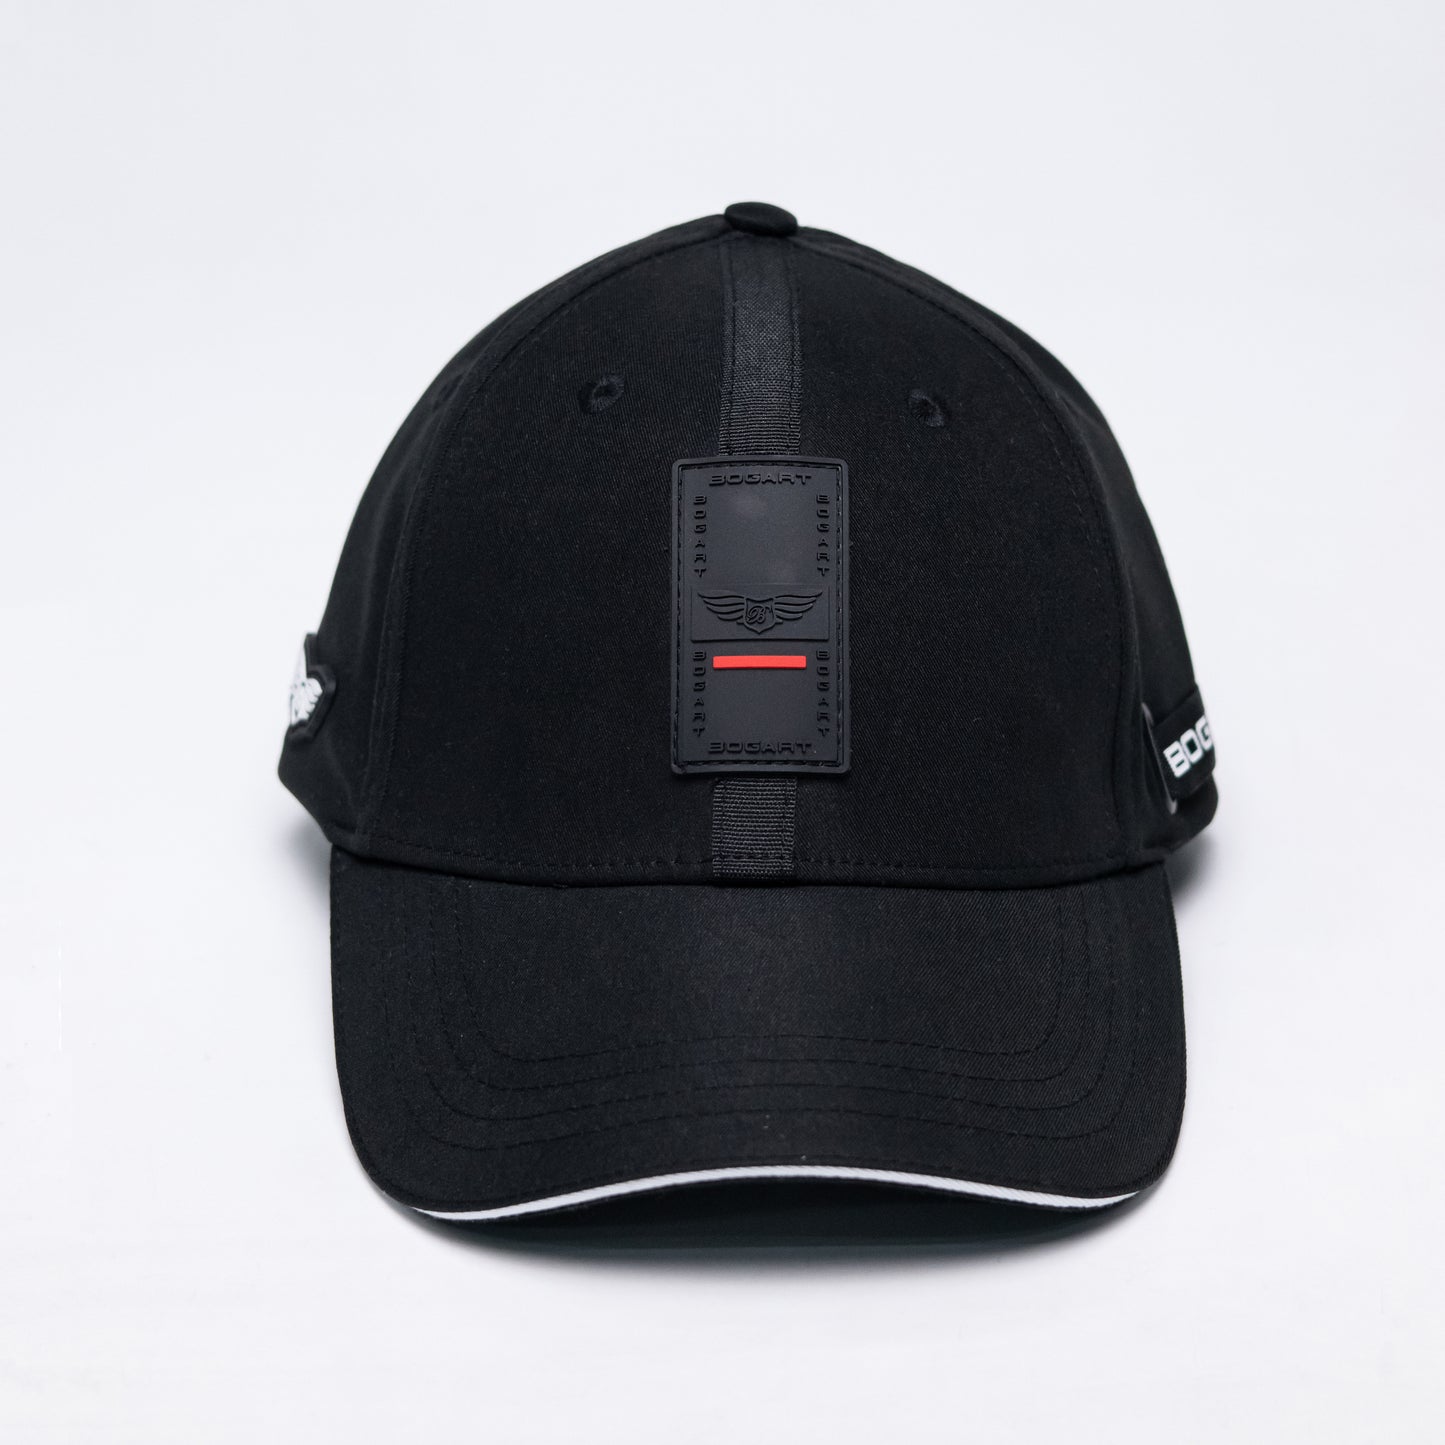 Bogart Black And White Collection Cap